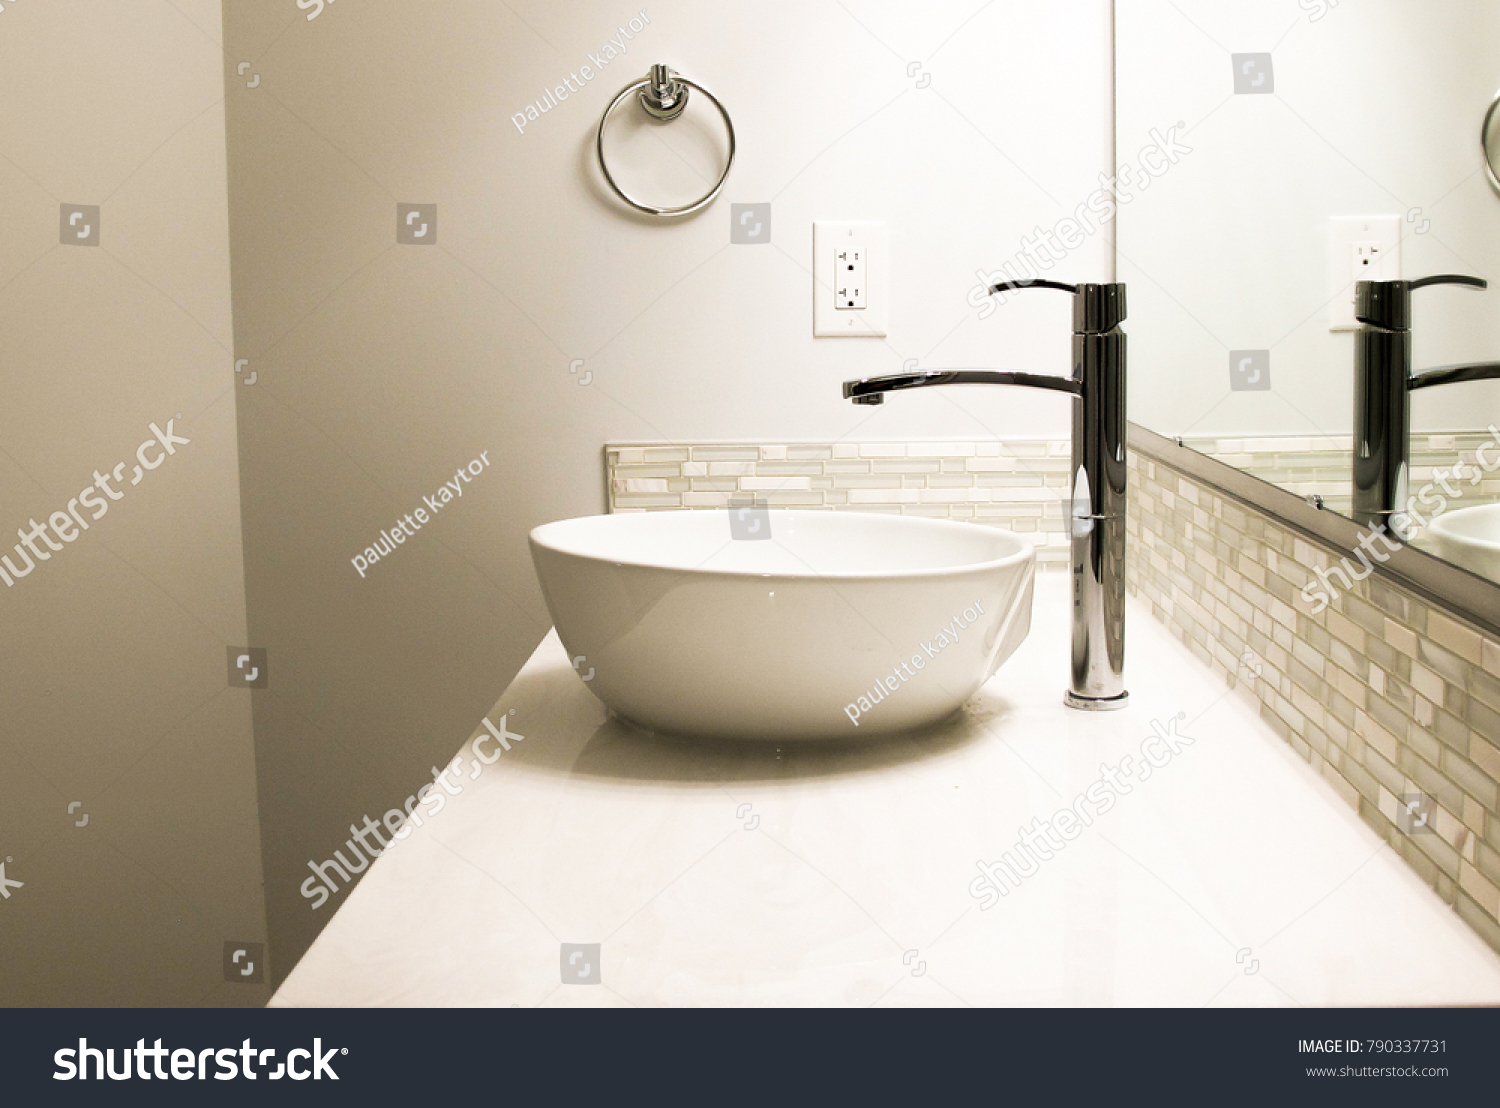 Side View Bathroom Sink Faucet Stock Photo Edit Now 790337731